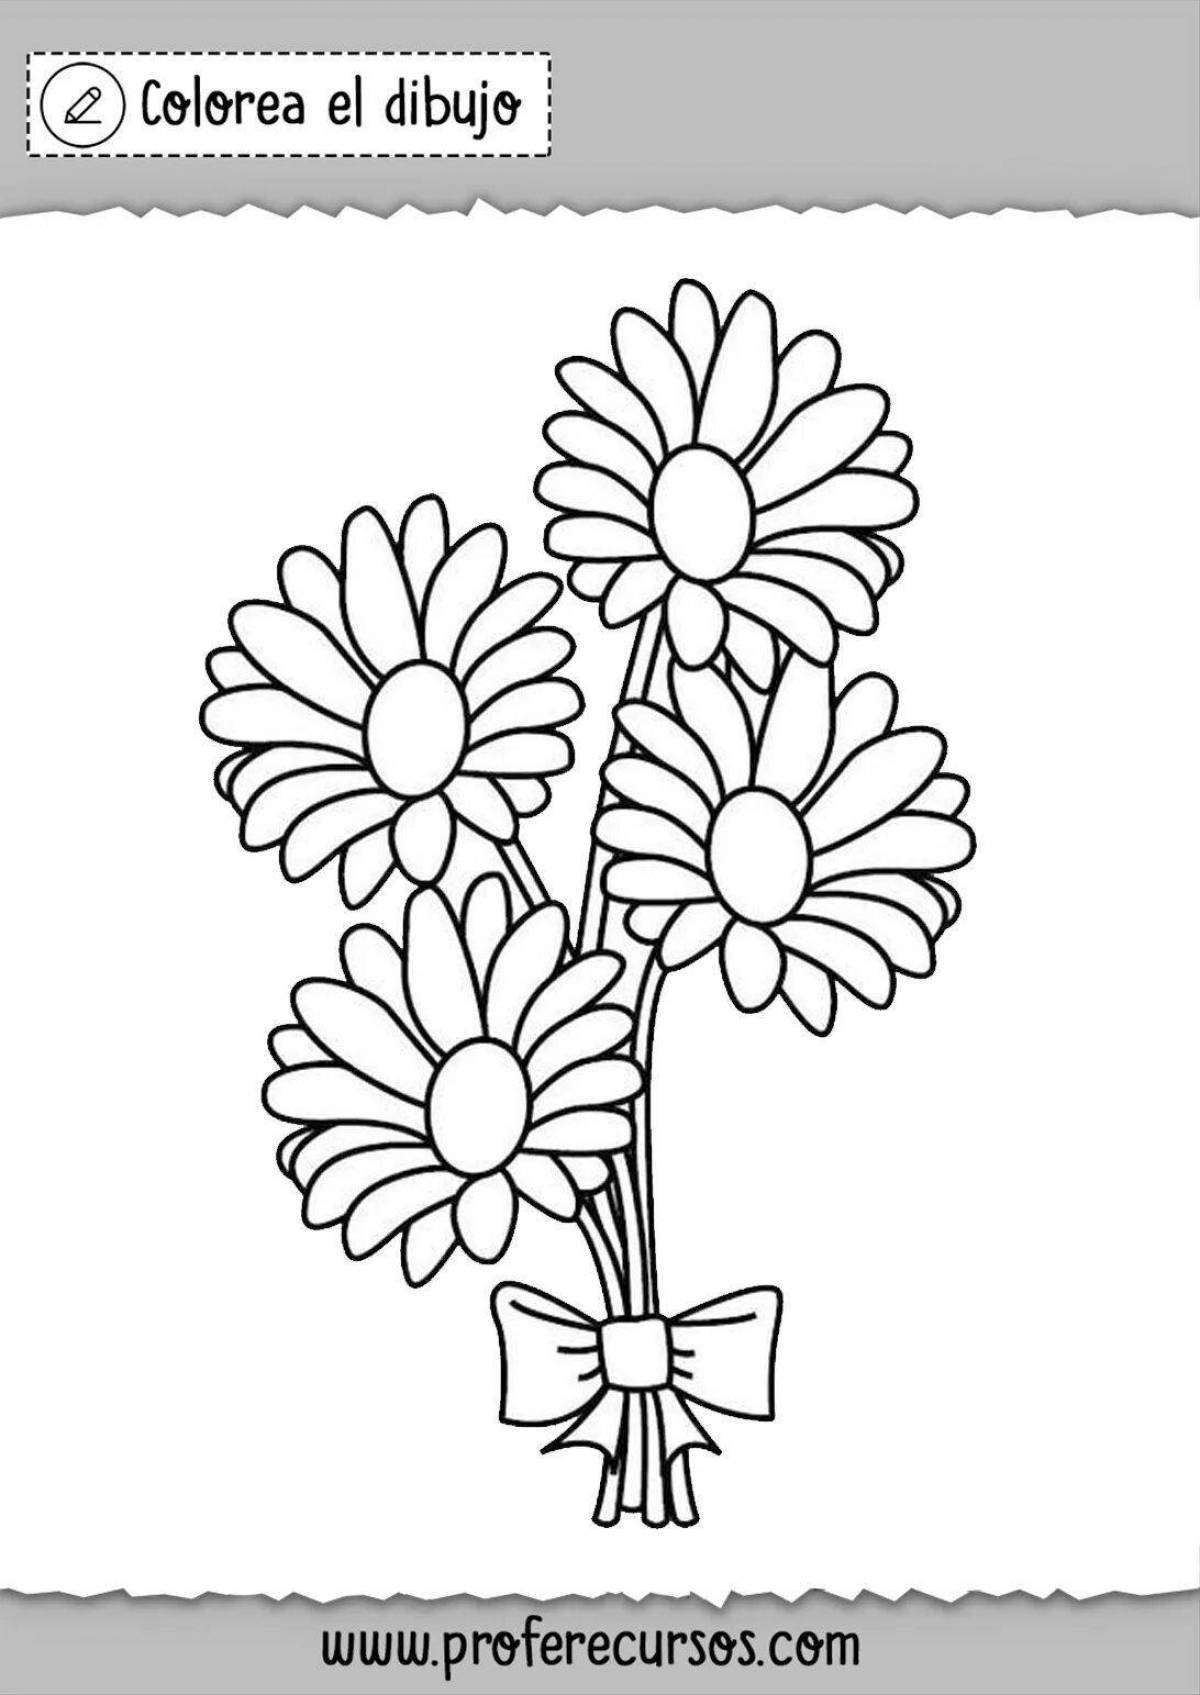 Gorgeous daisy flower coloring book for preschoolers